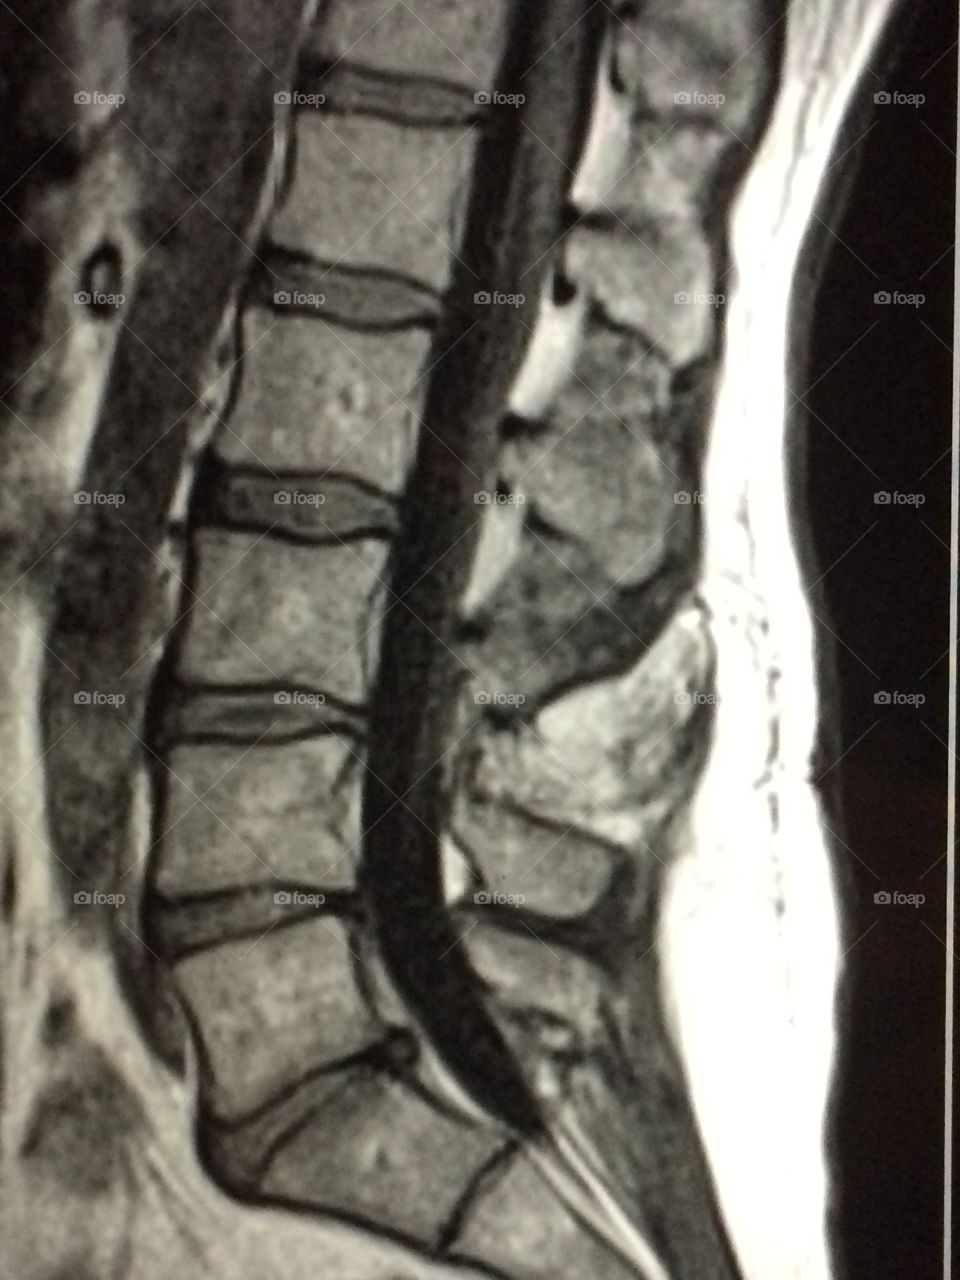 MRI of the Lumbar Spine with Disc Herniation